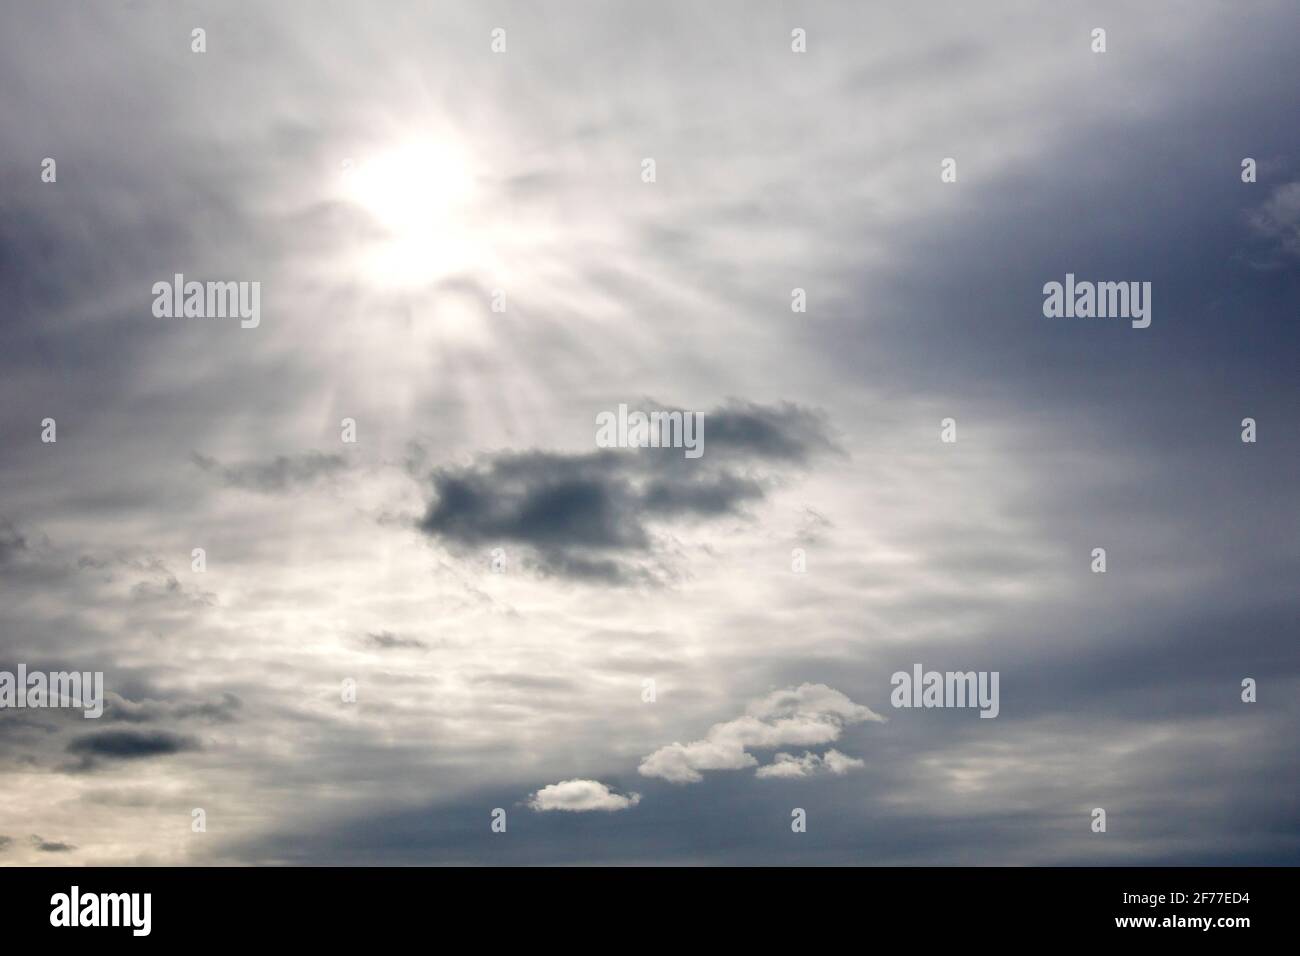 An overcast sky, the cloud thin enough to allow the sun to shine weakly through and illuminate some lower level clouds. Stock Photo